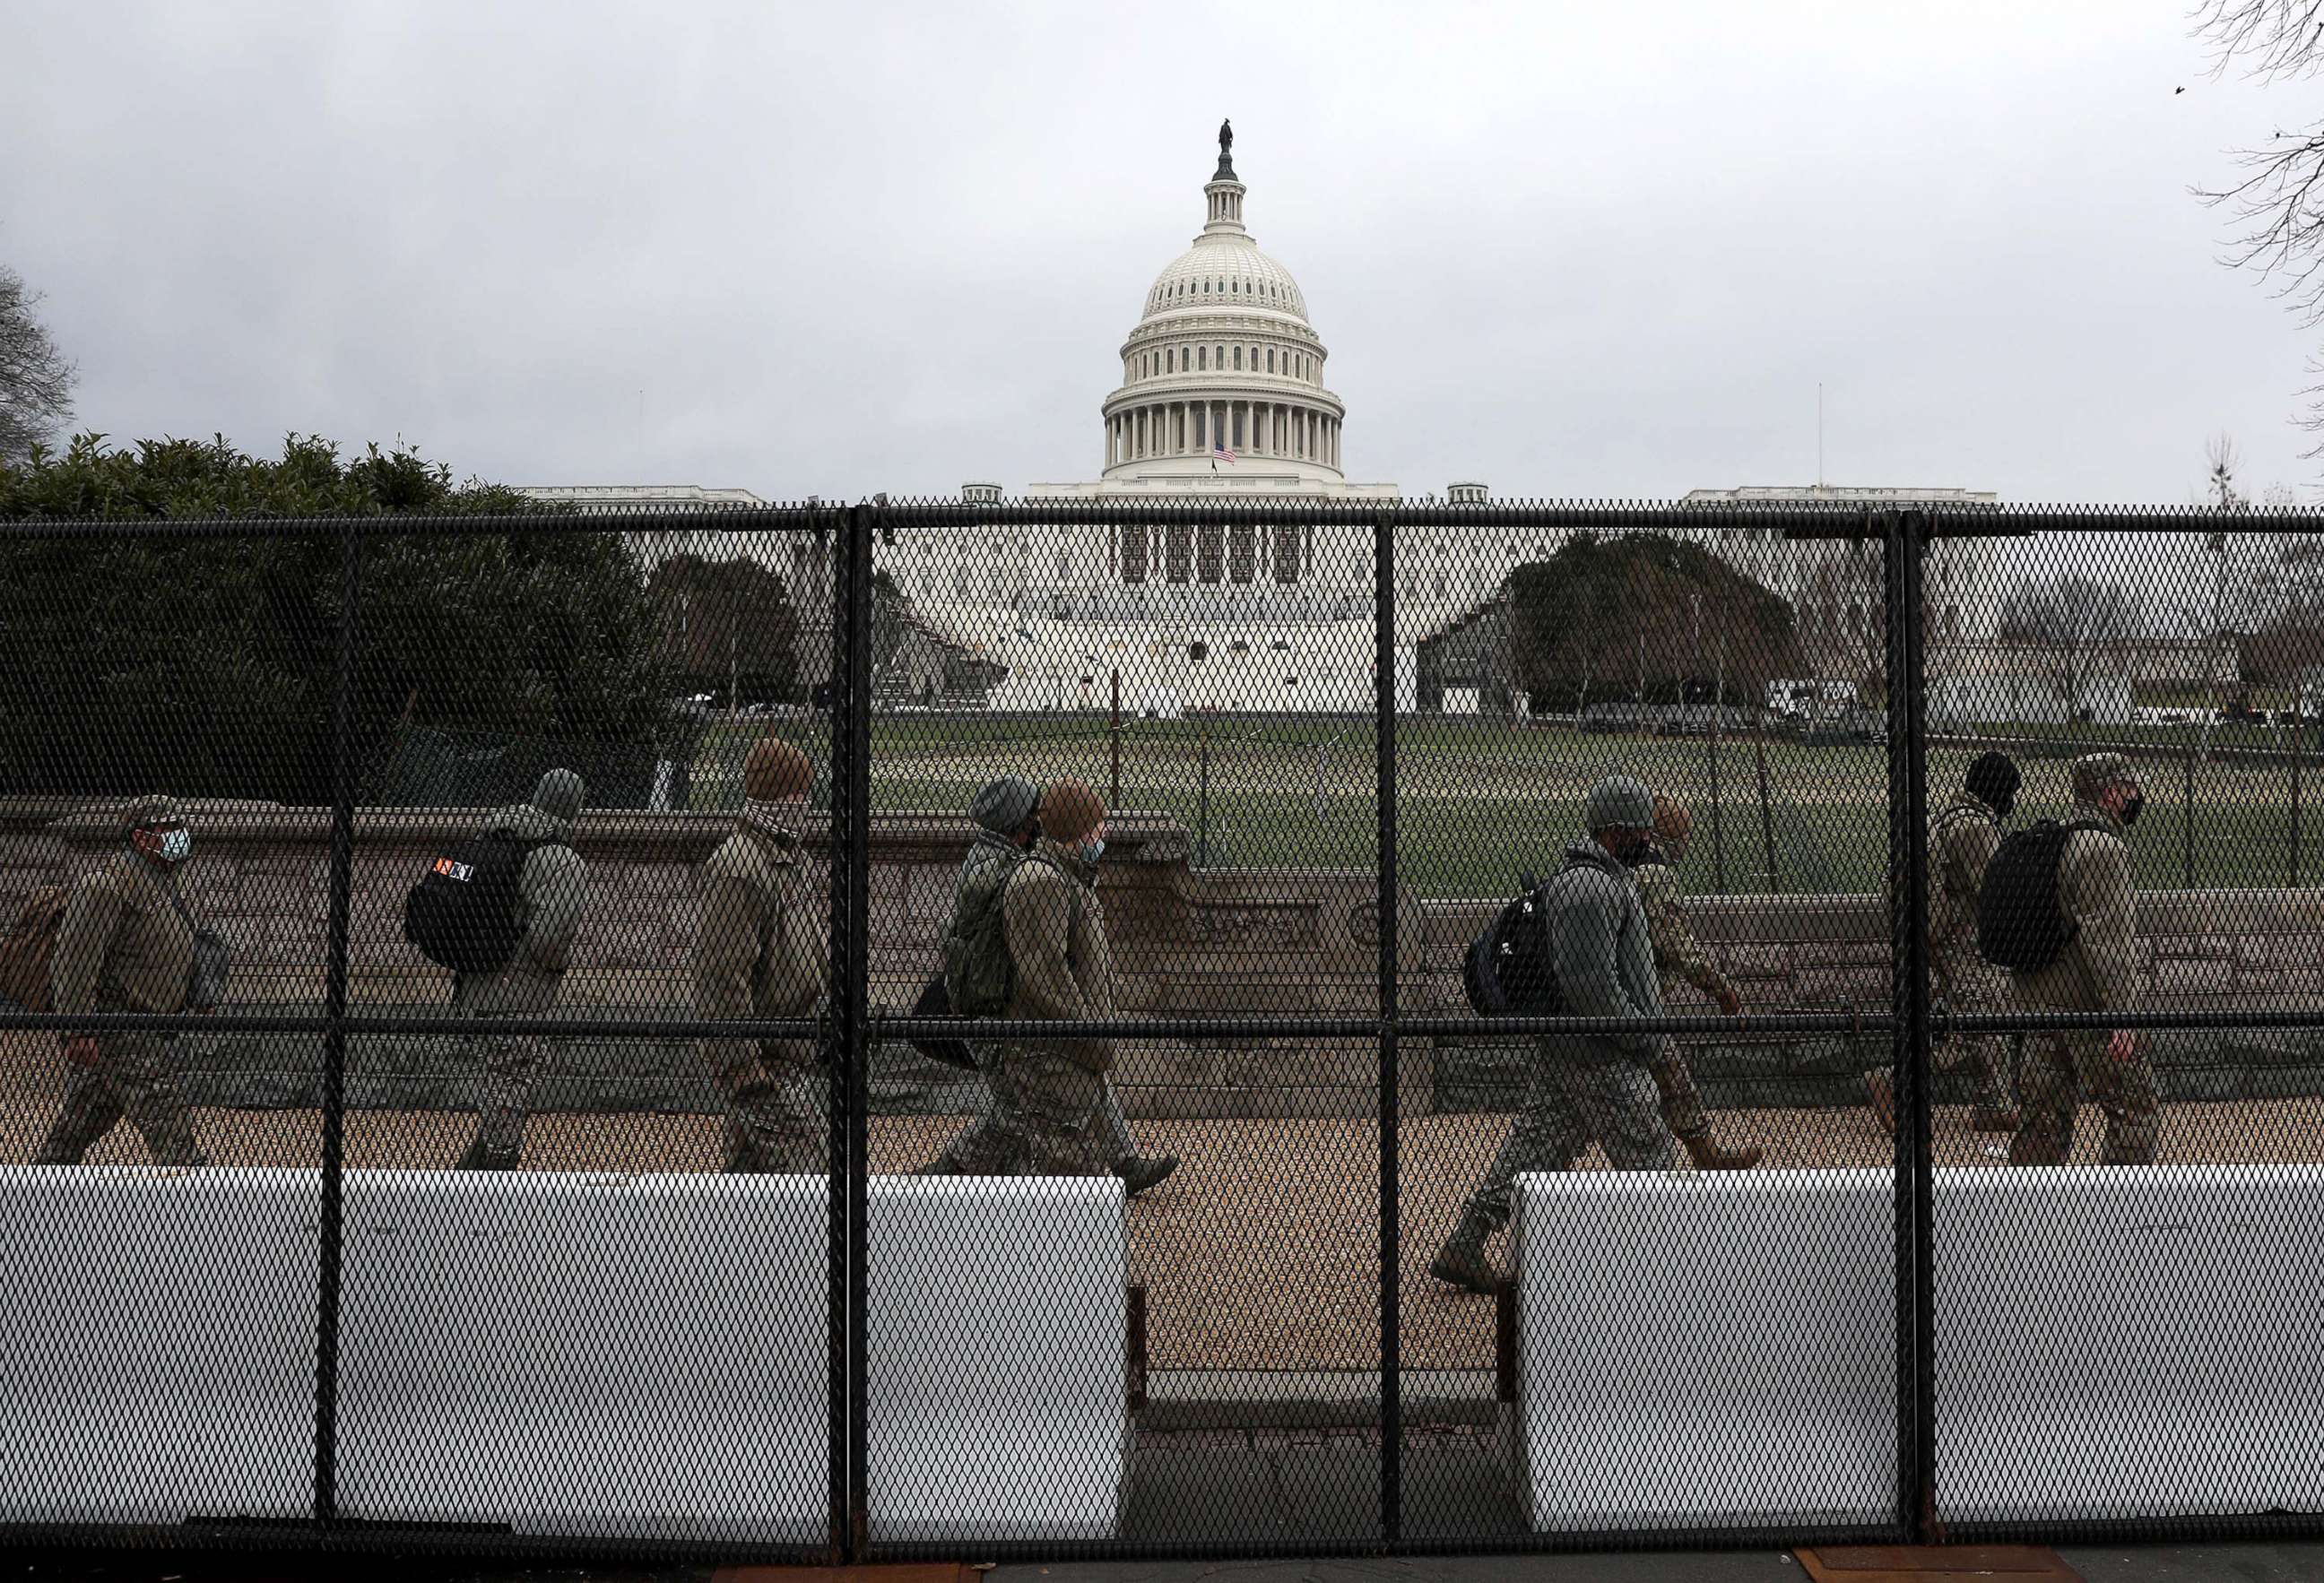 PHOTO: Members of the D.C. National Guard walk behind a fence placed around the U.S. Capitol building on Jan. 08, 2021.